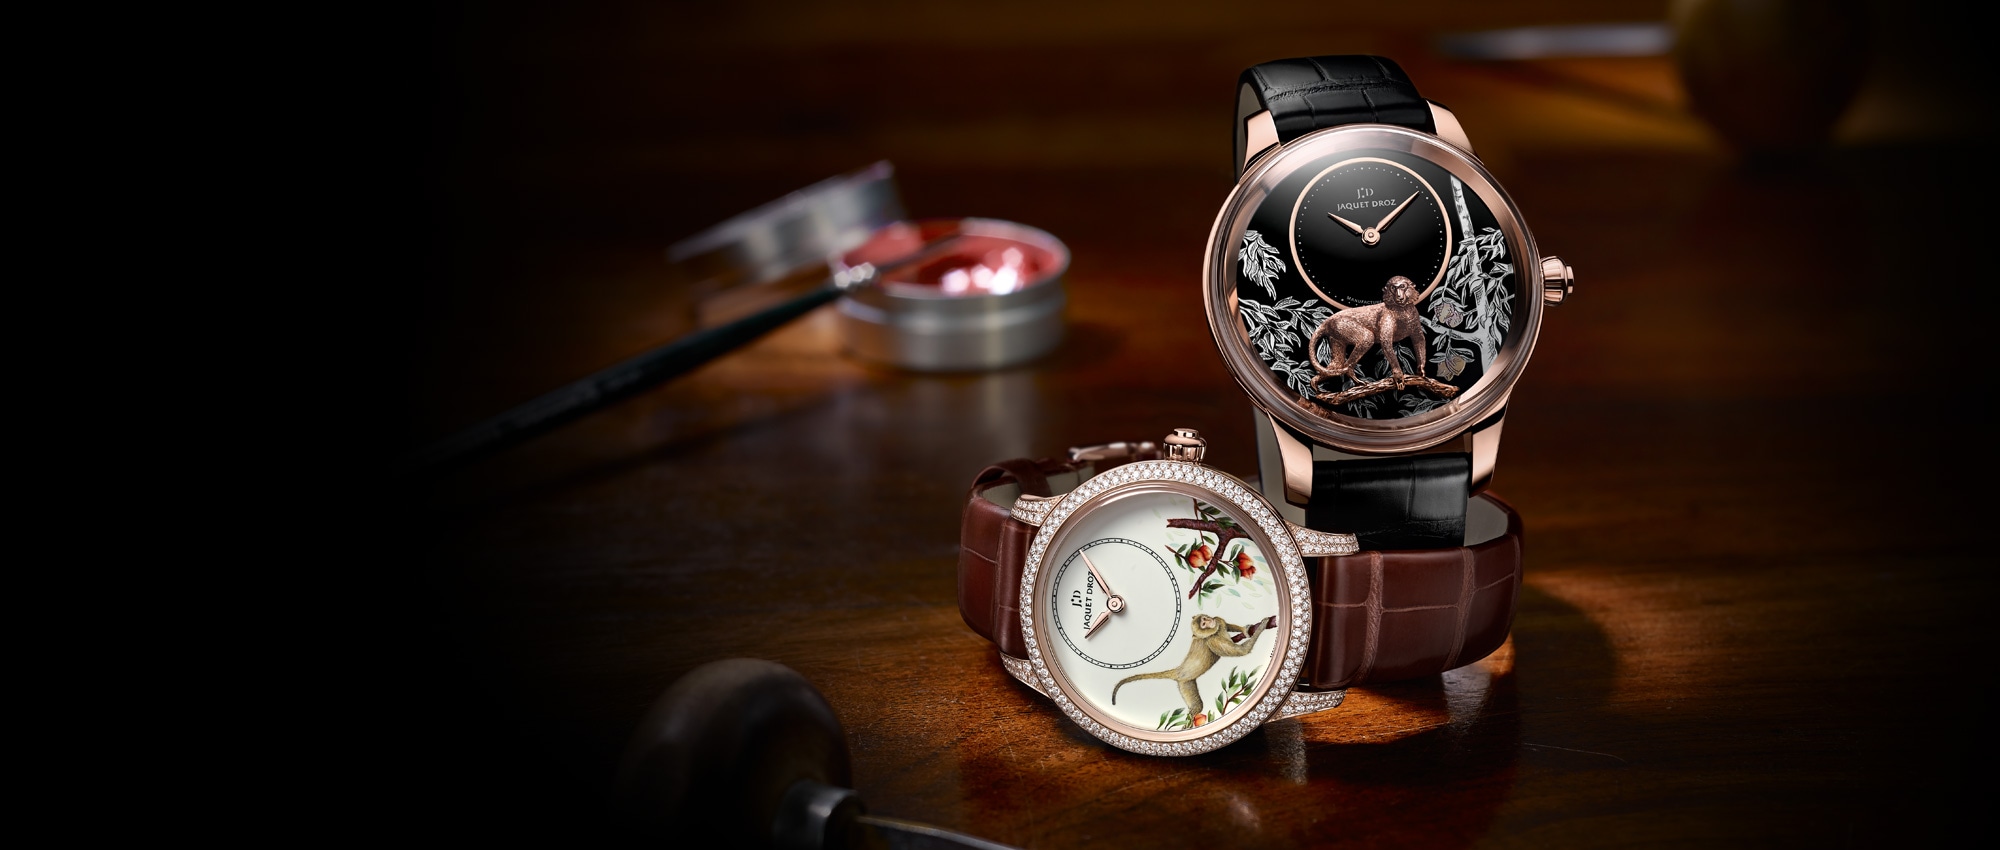 Jaquet Droz celebrates the Chinese new year with four exceptional models